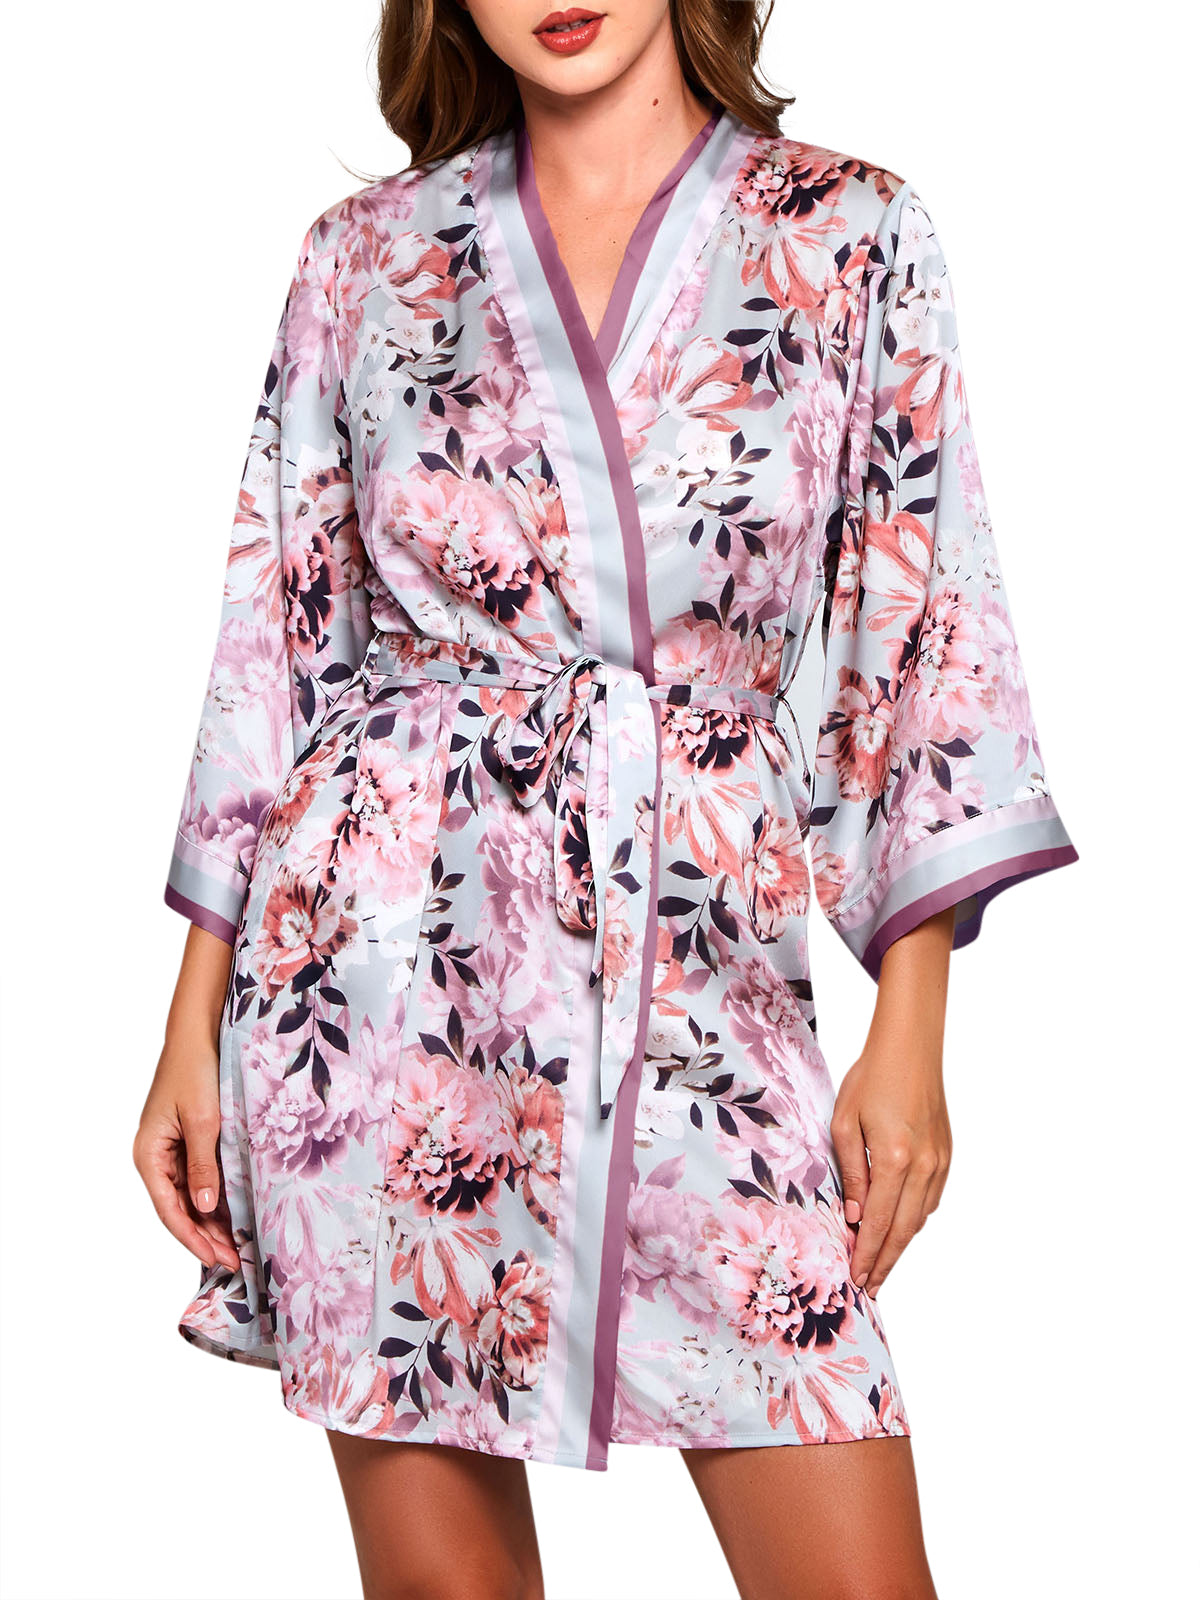 iCollection Leanne Robe